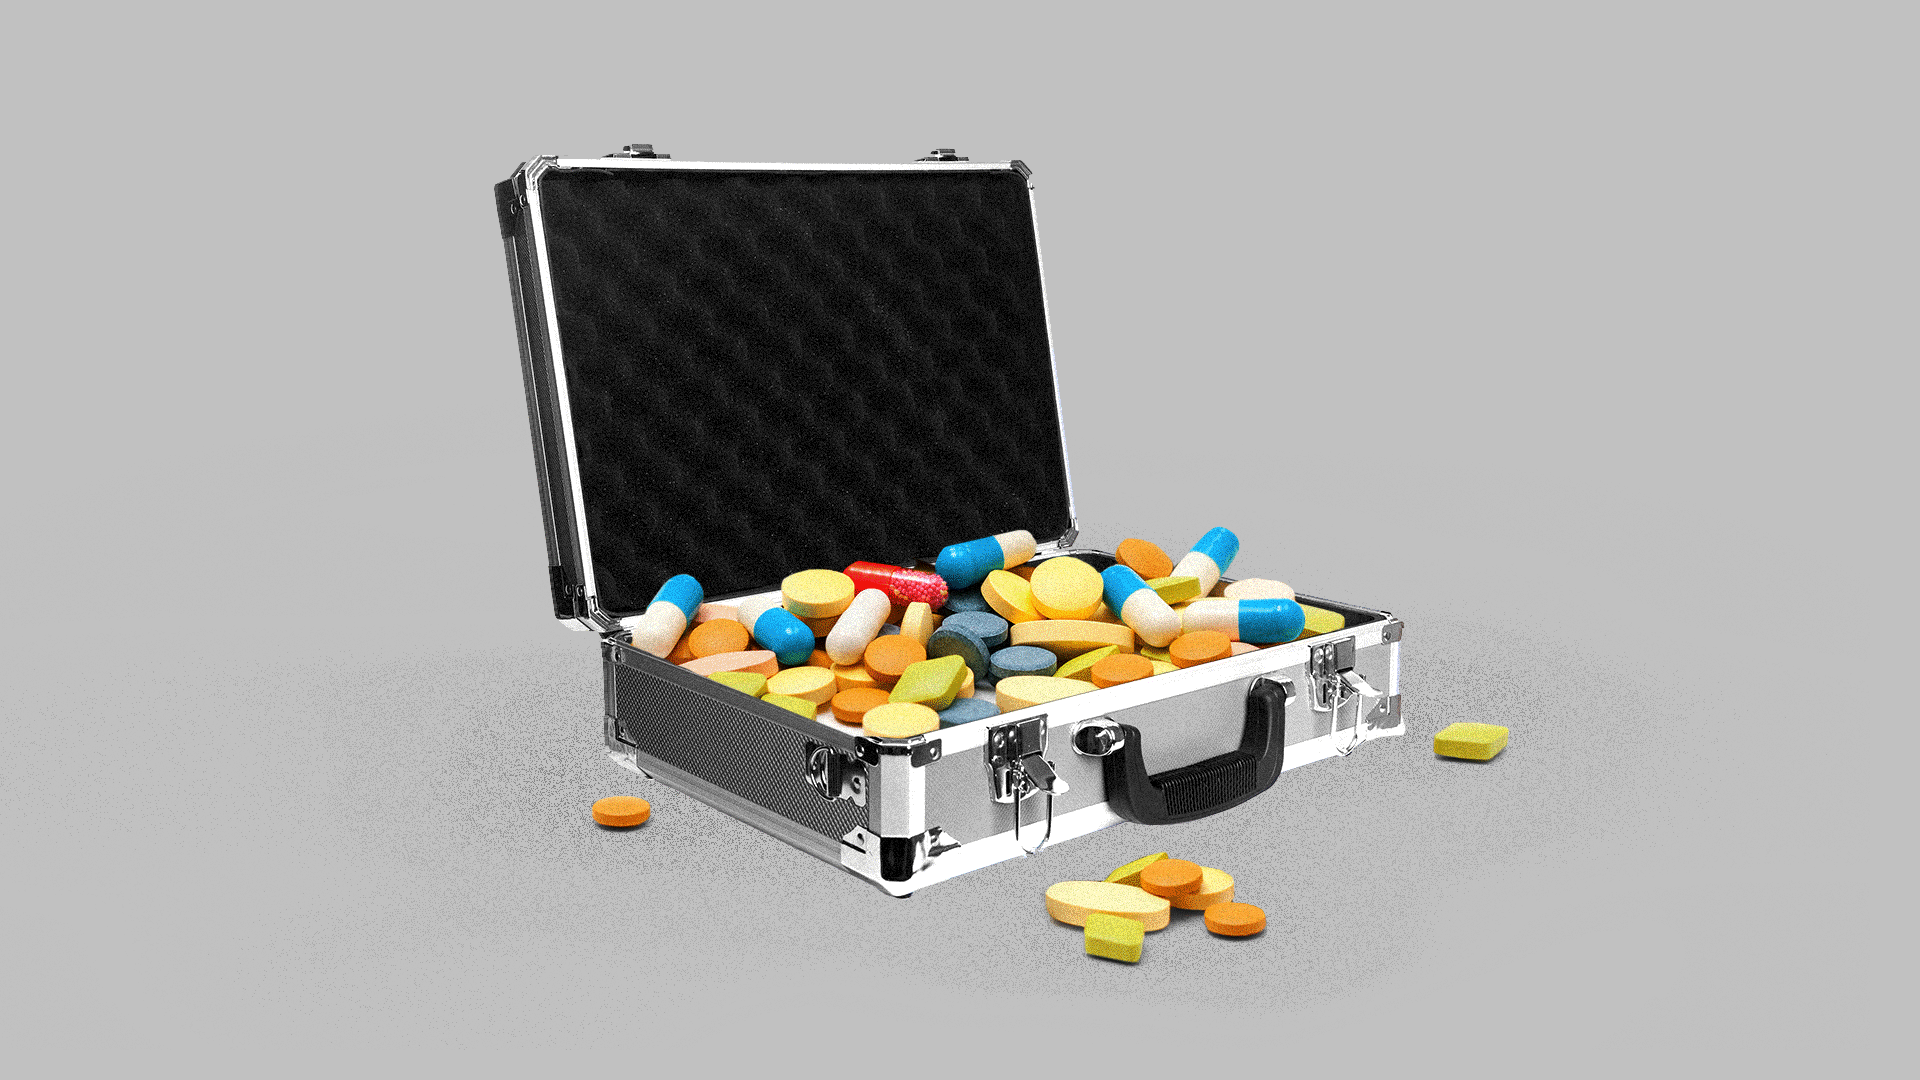 Illustration of an opened metallic suitcase overflowing with pills